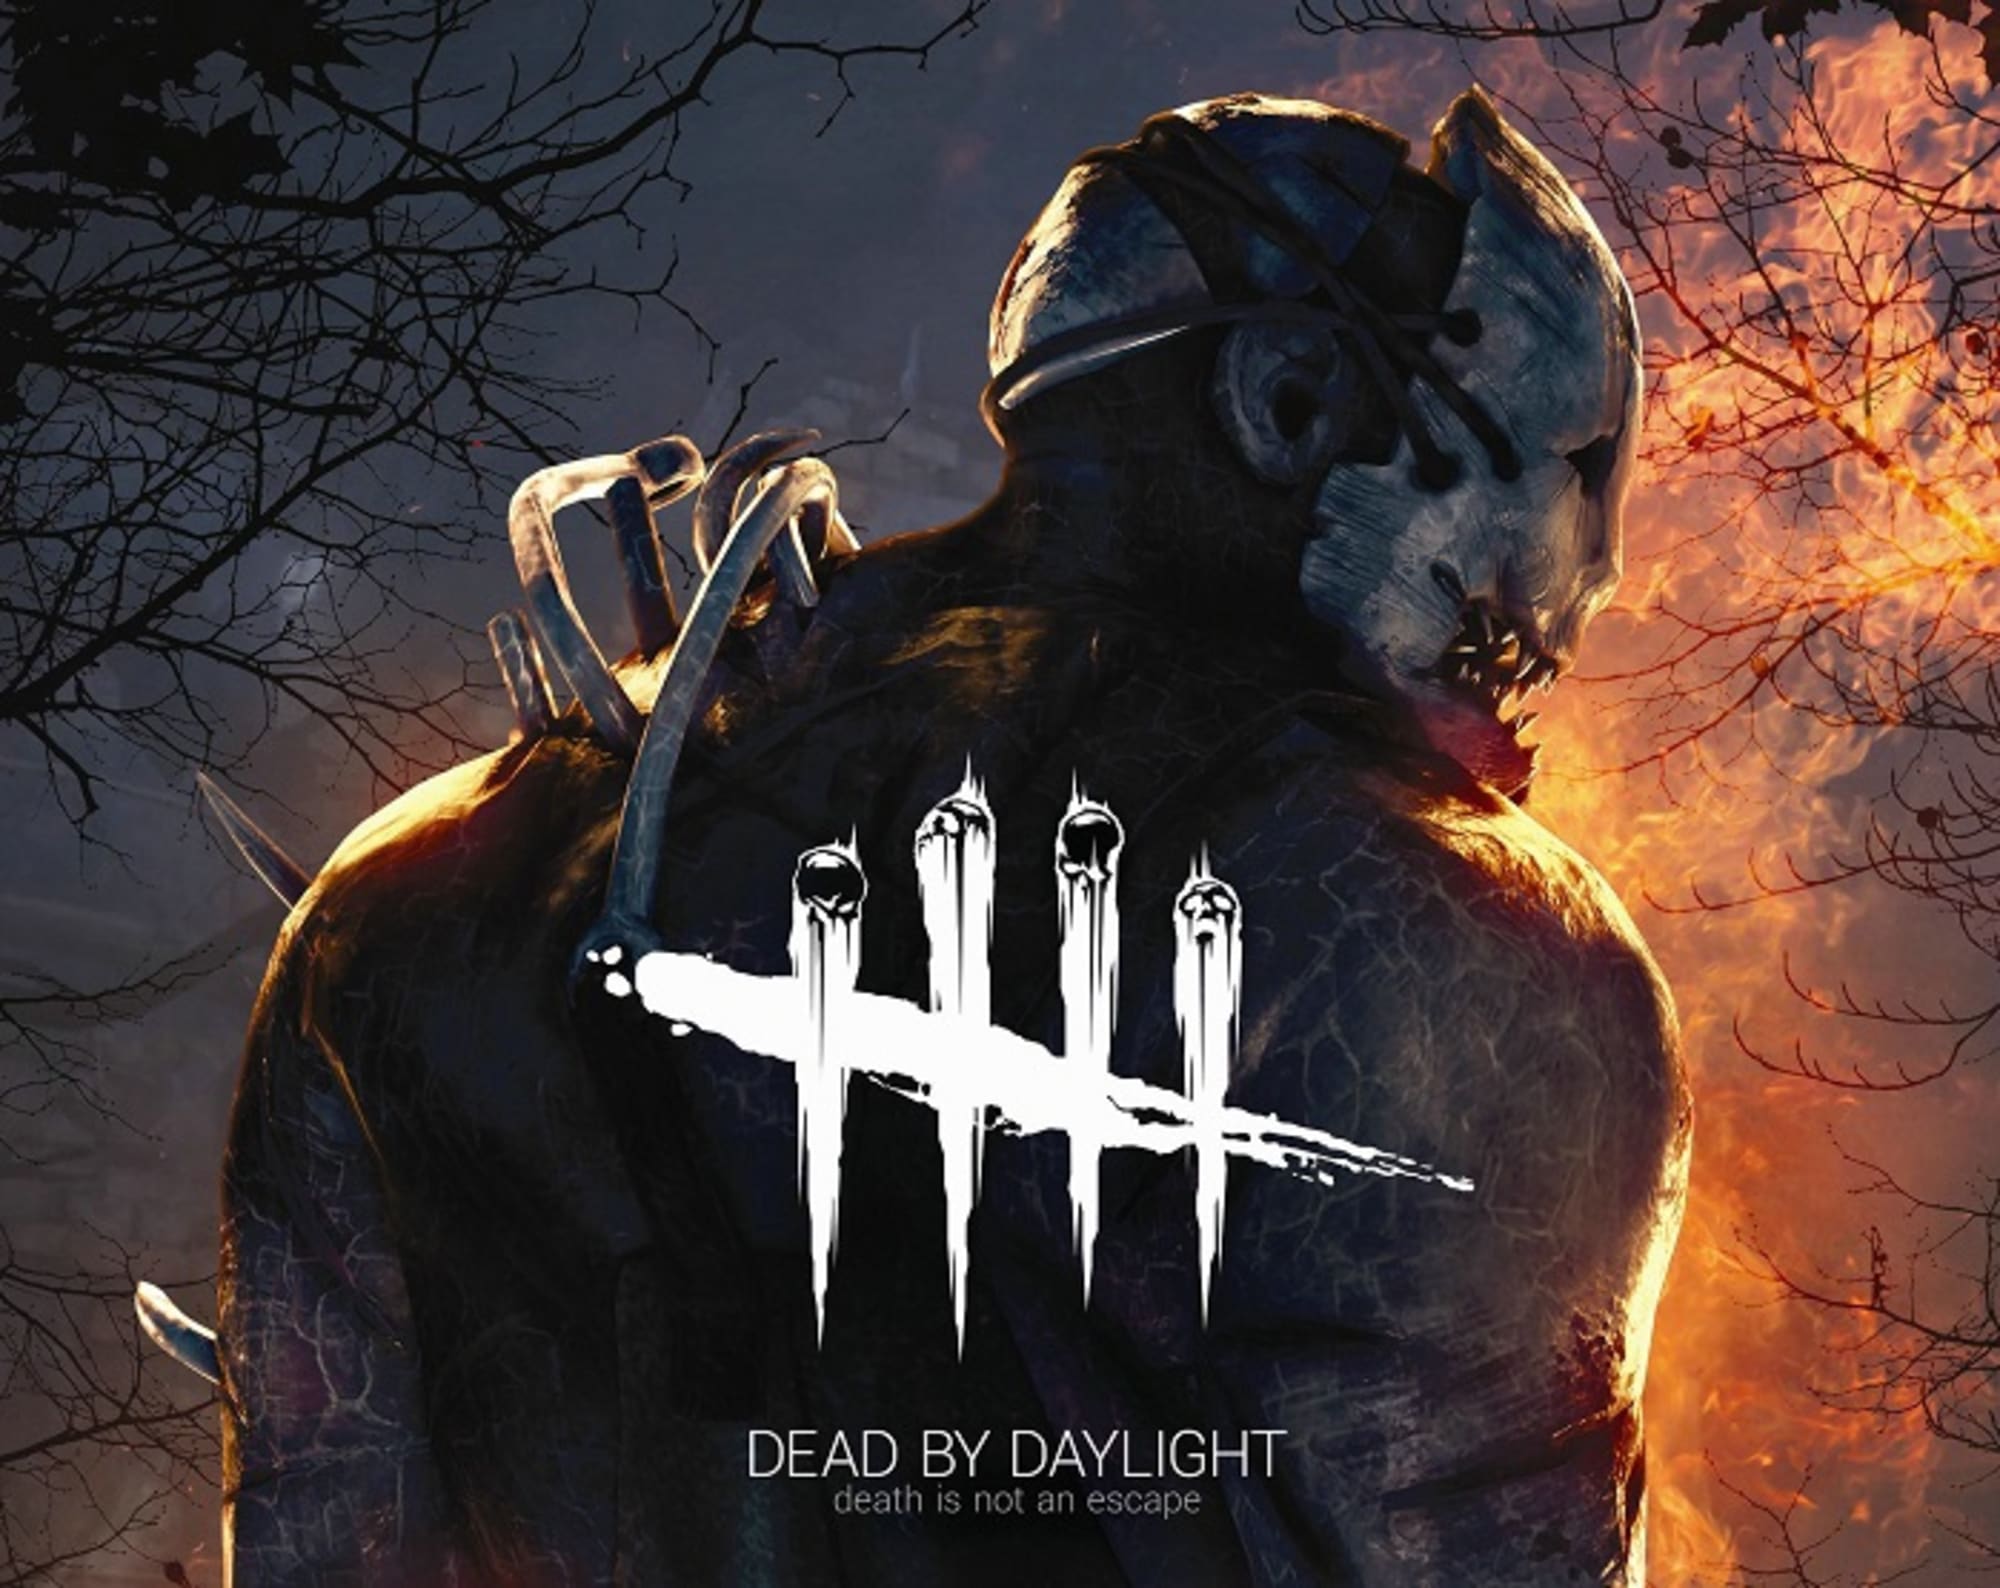 Dead by Daylight review This genre is close to DOA